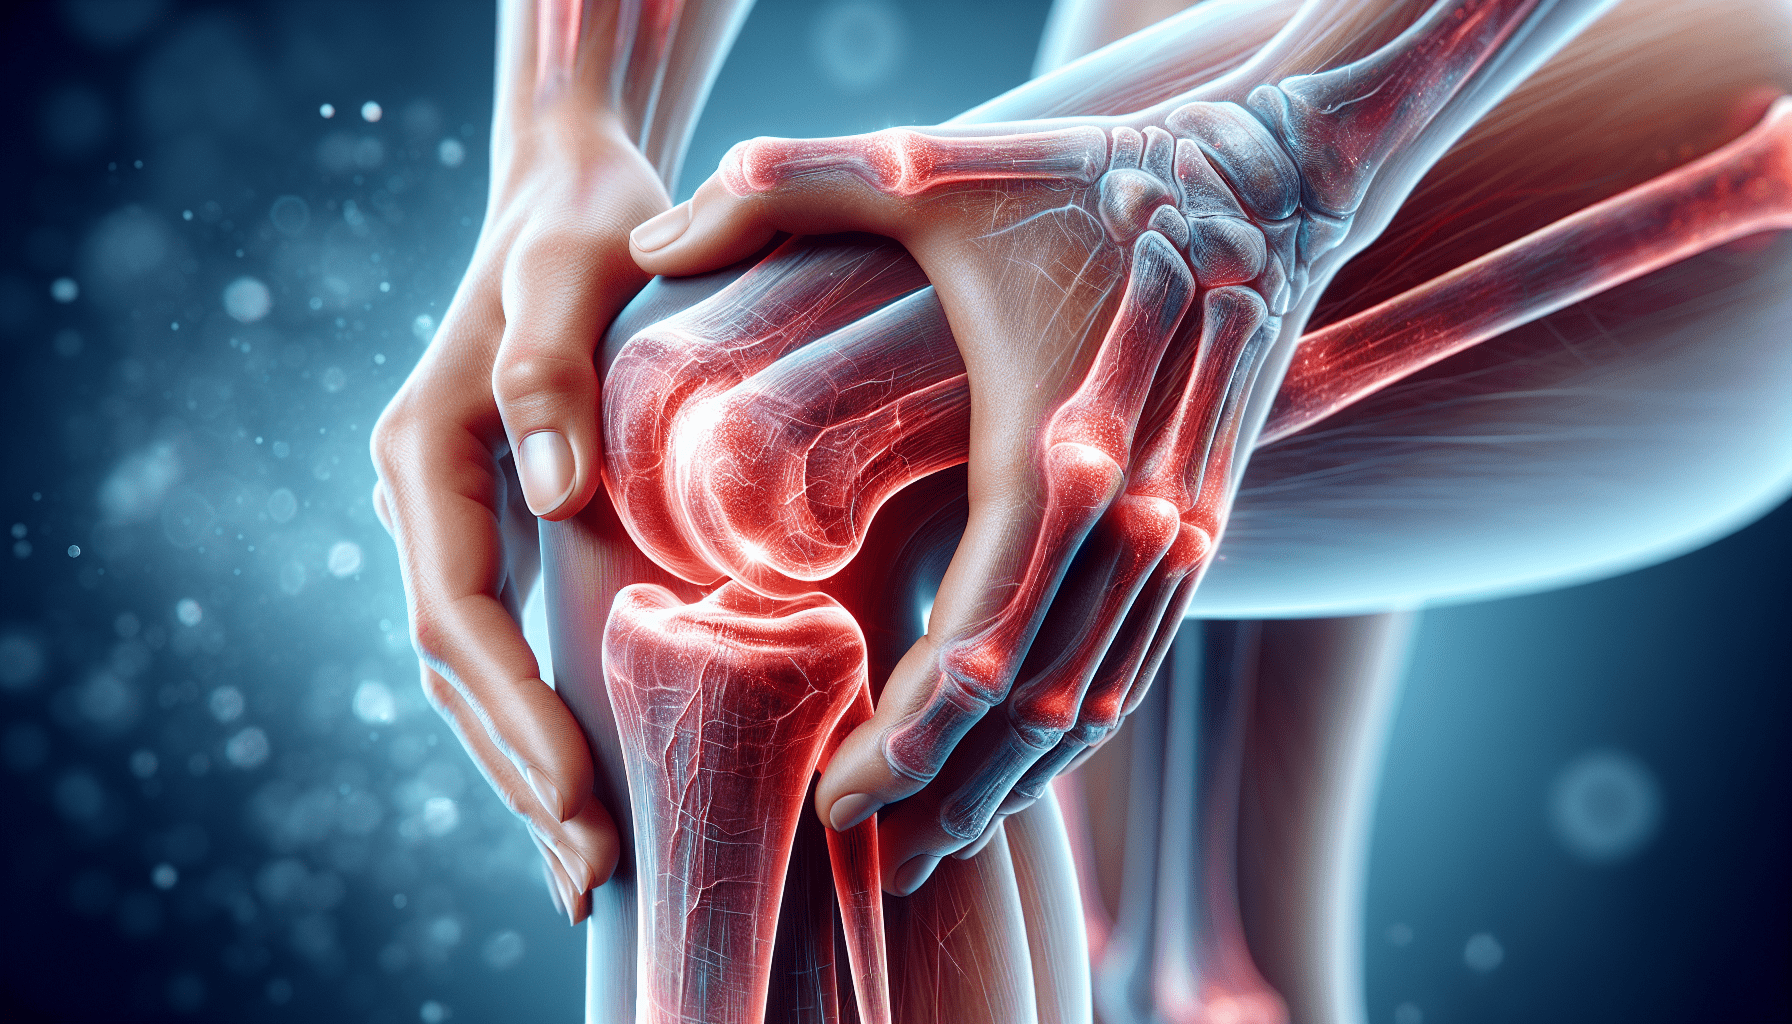 How Does Arthritis Affect You Physically?